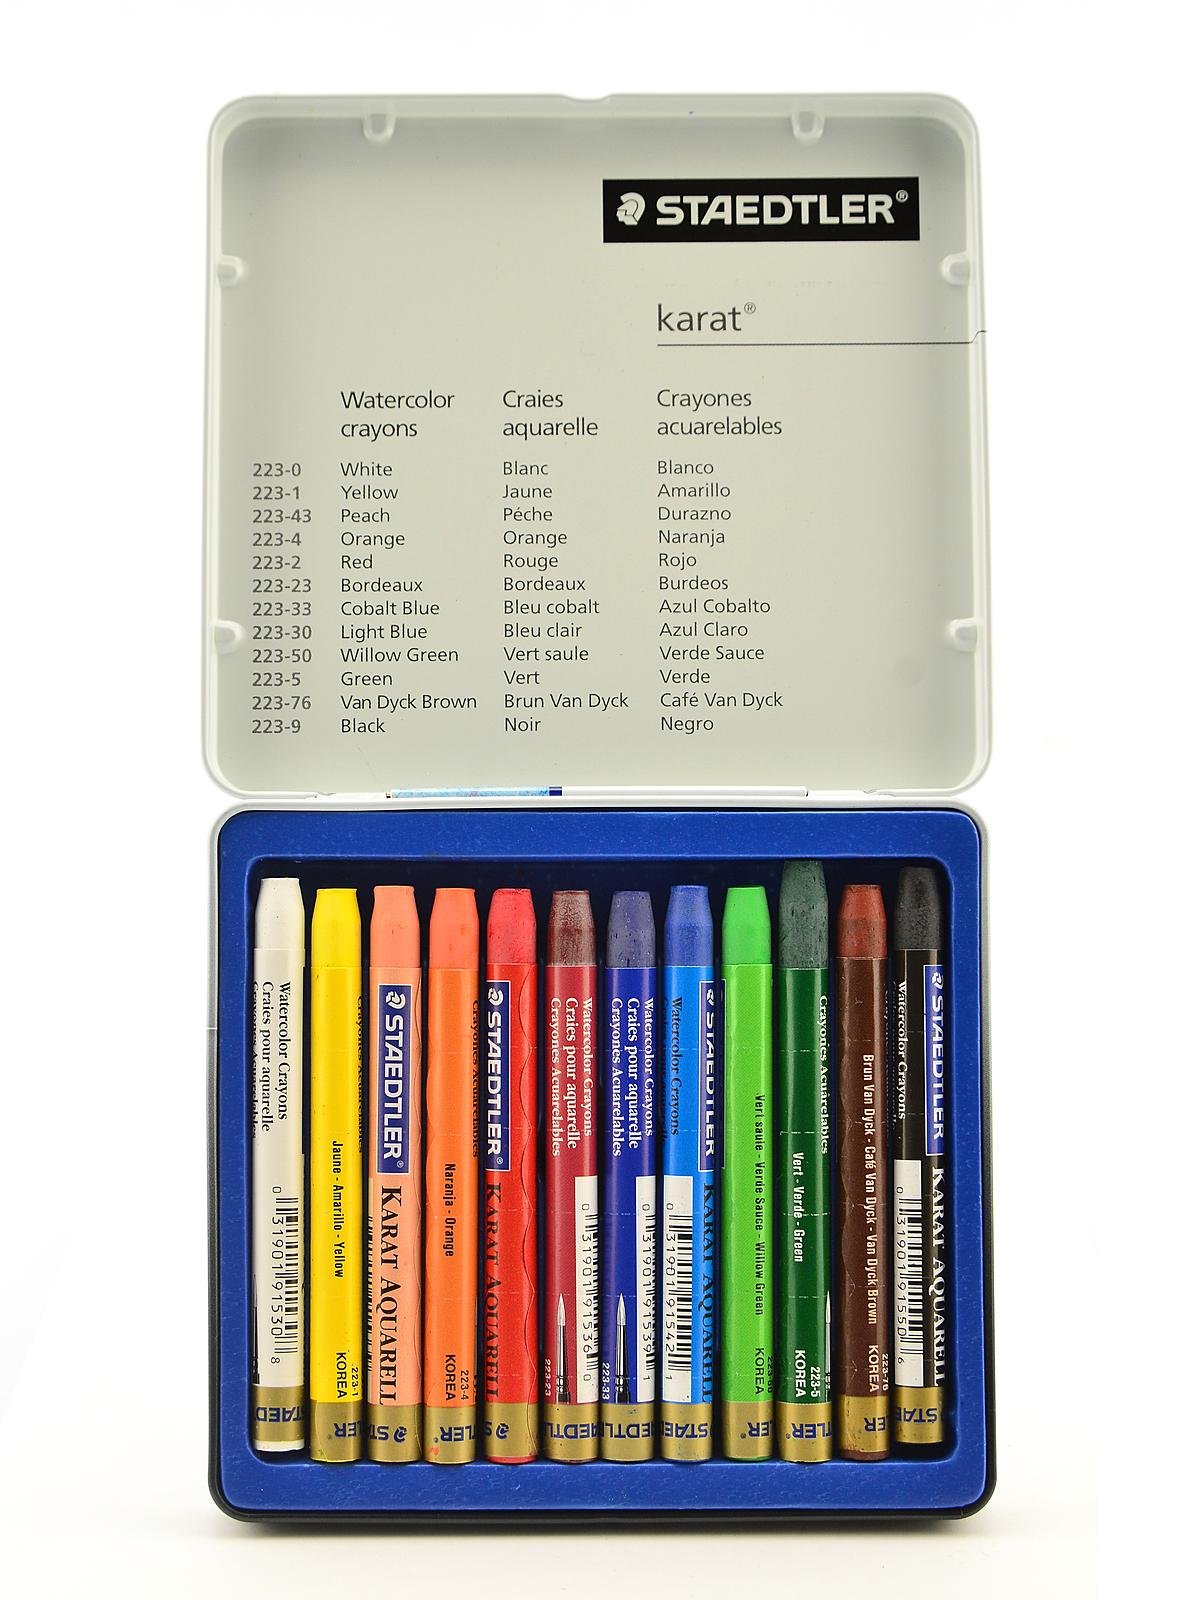 The Top 5 Watercolor, Colored Pencil and Crayon Sets for Kids